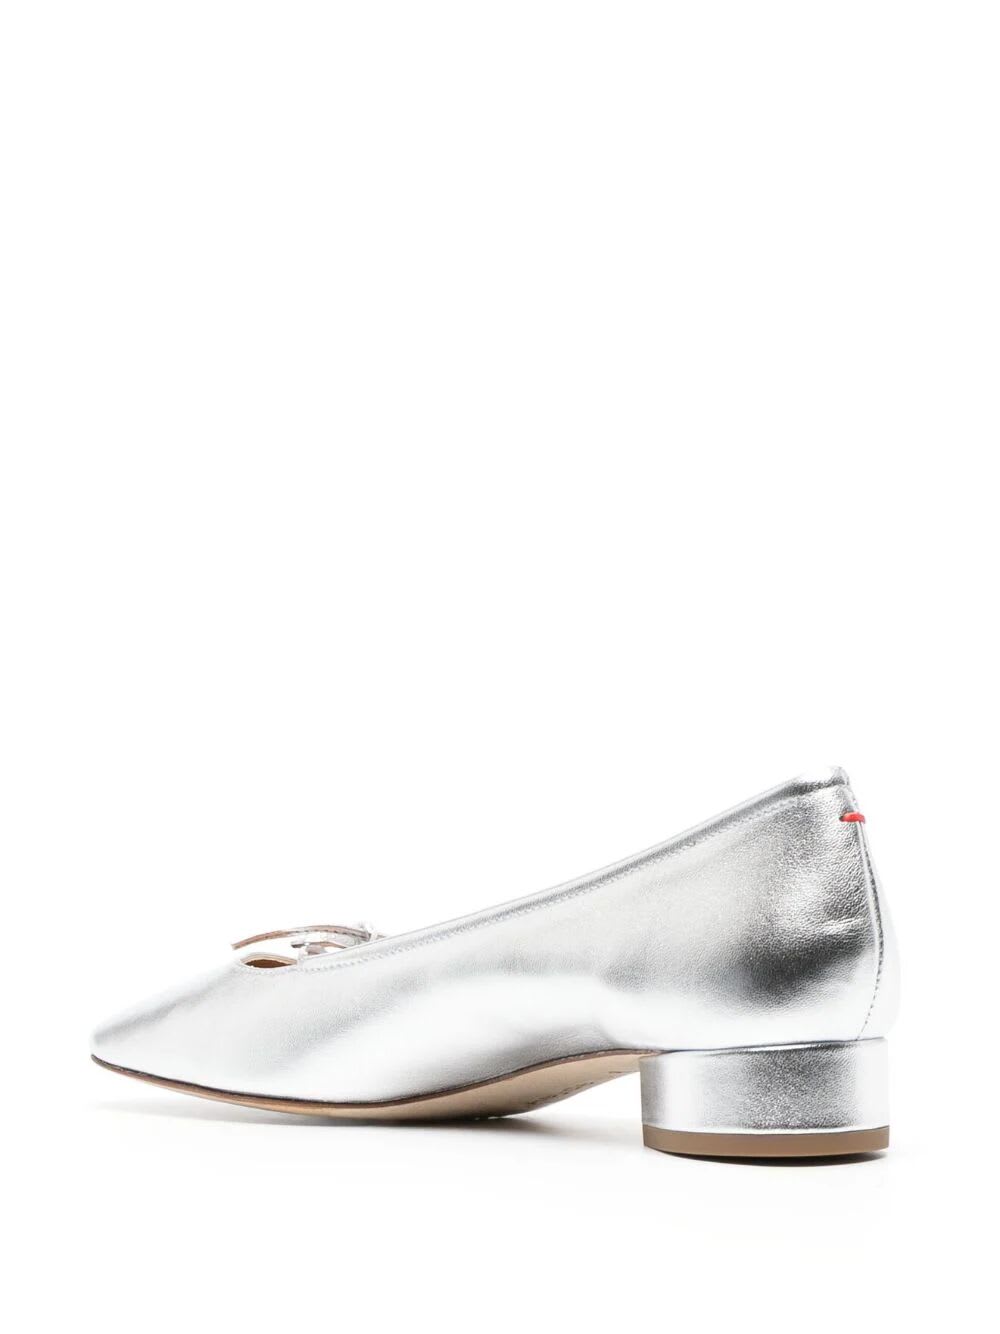 Shop Aeyde Darya Laminated Nappa Leather Silver Shoes